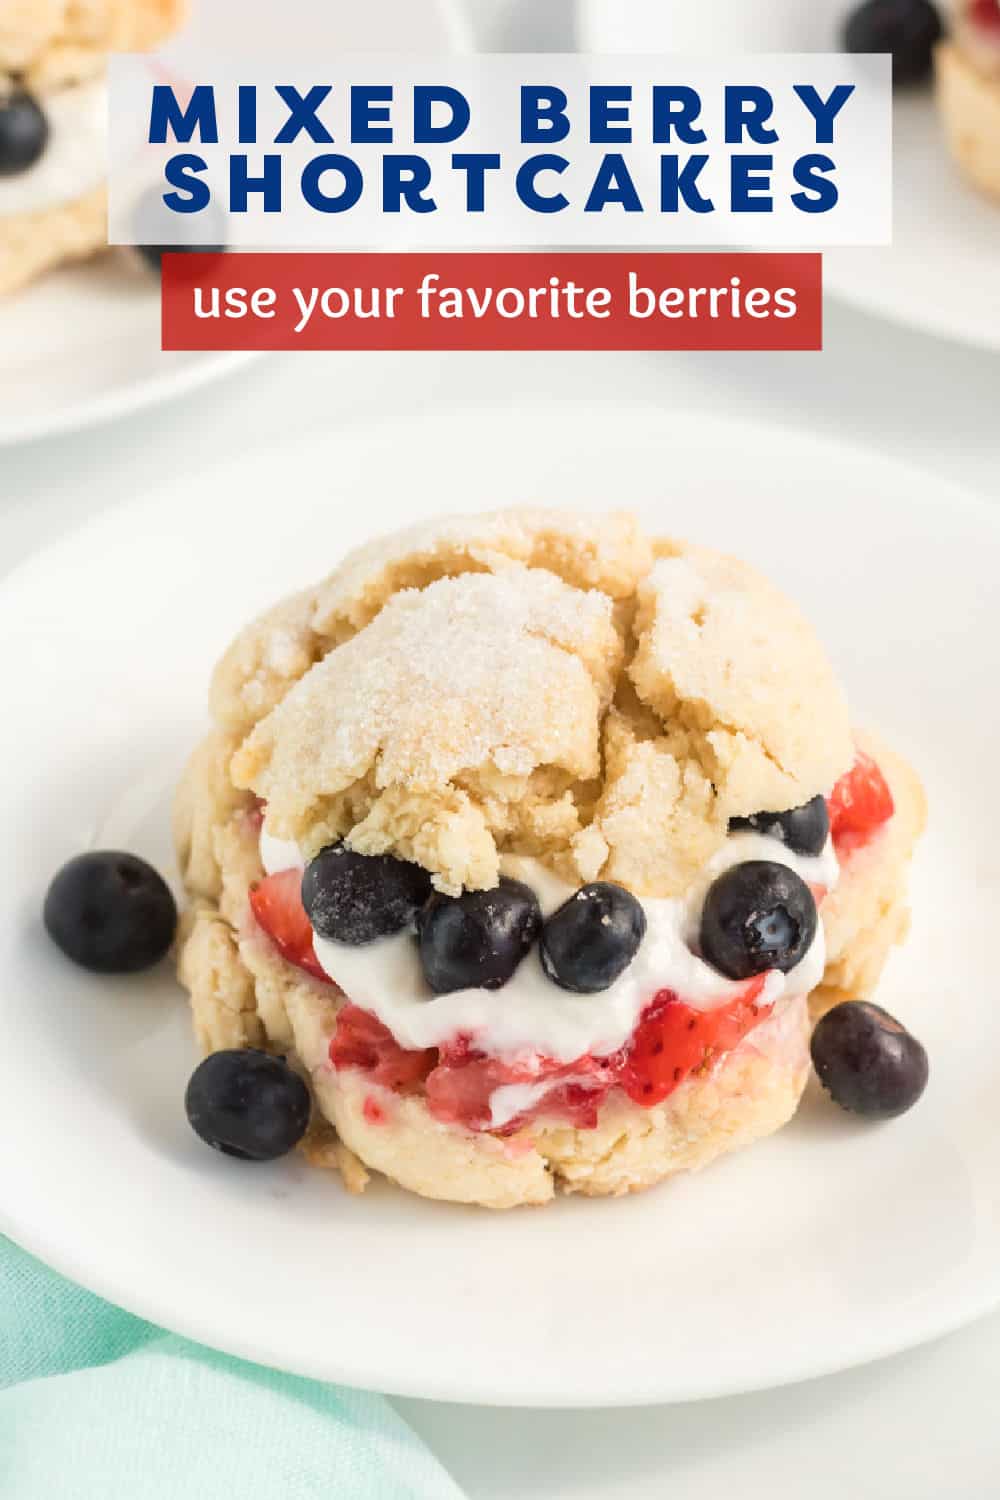 Mixed Berry Shortcakes take sweet, buttery shortcakes topped with homemade whipped cream and stuffed with ripe, fresh, juicy strawberries and blueberries. This lightly sweetened dessert recipe is perfect for any occasion. | www.persnicketyplates.com